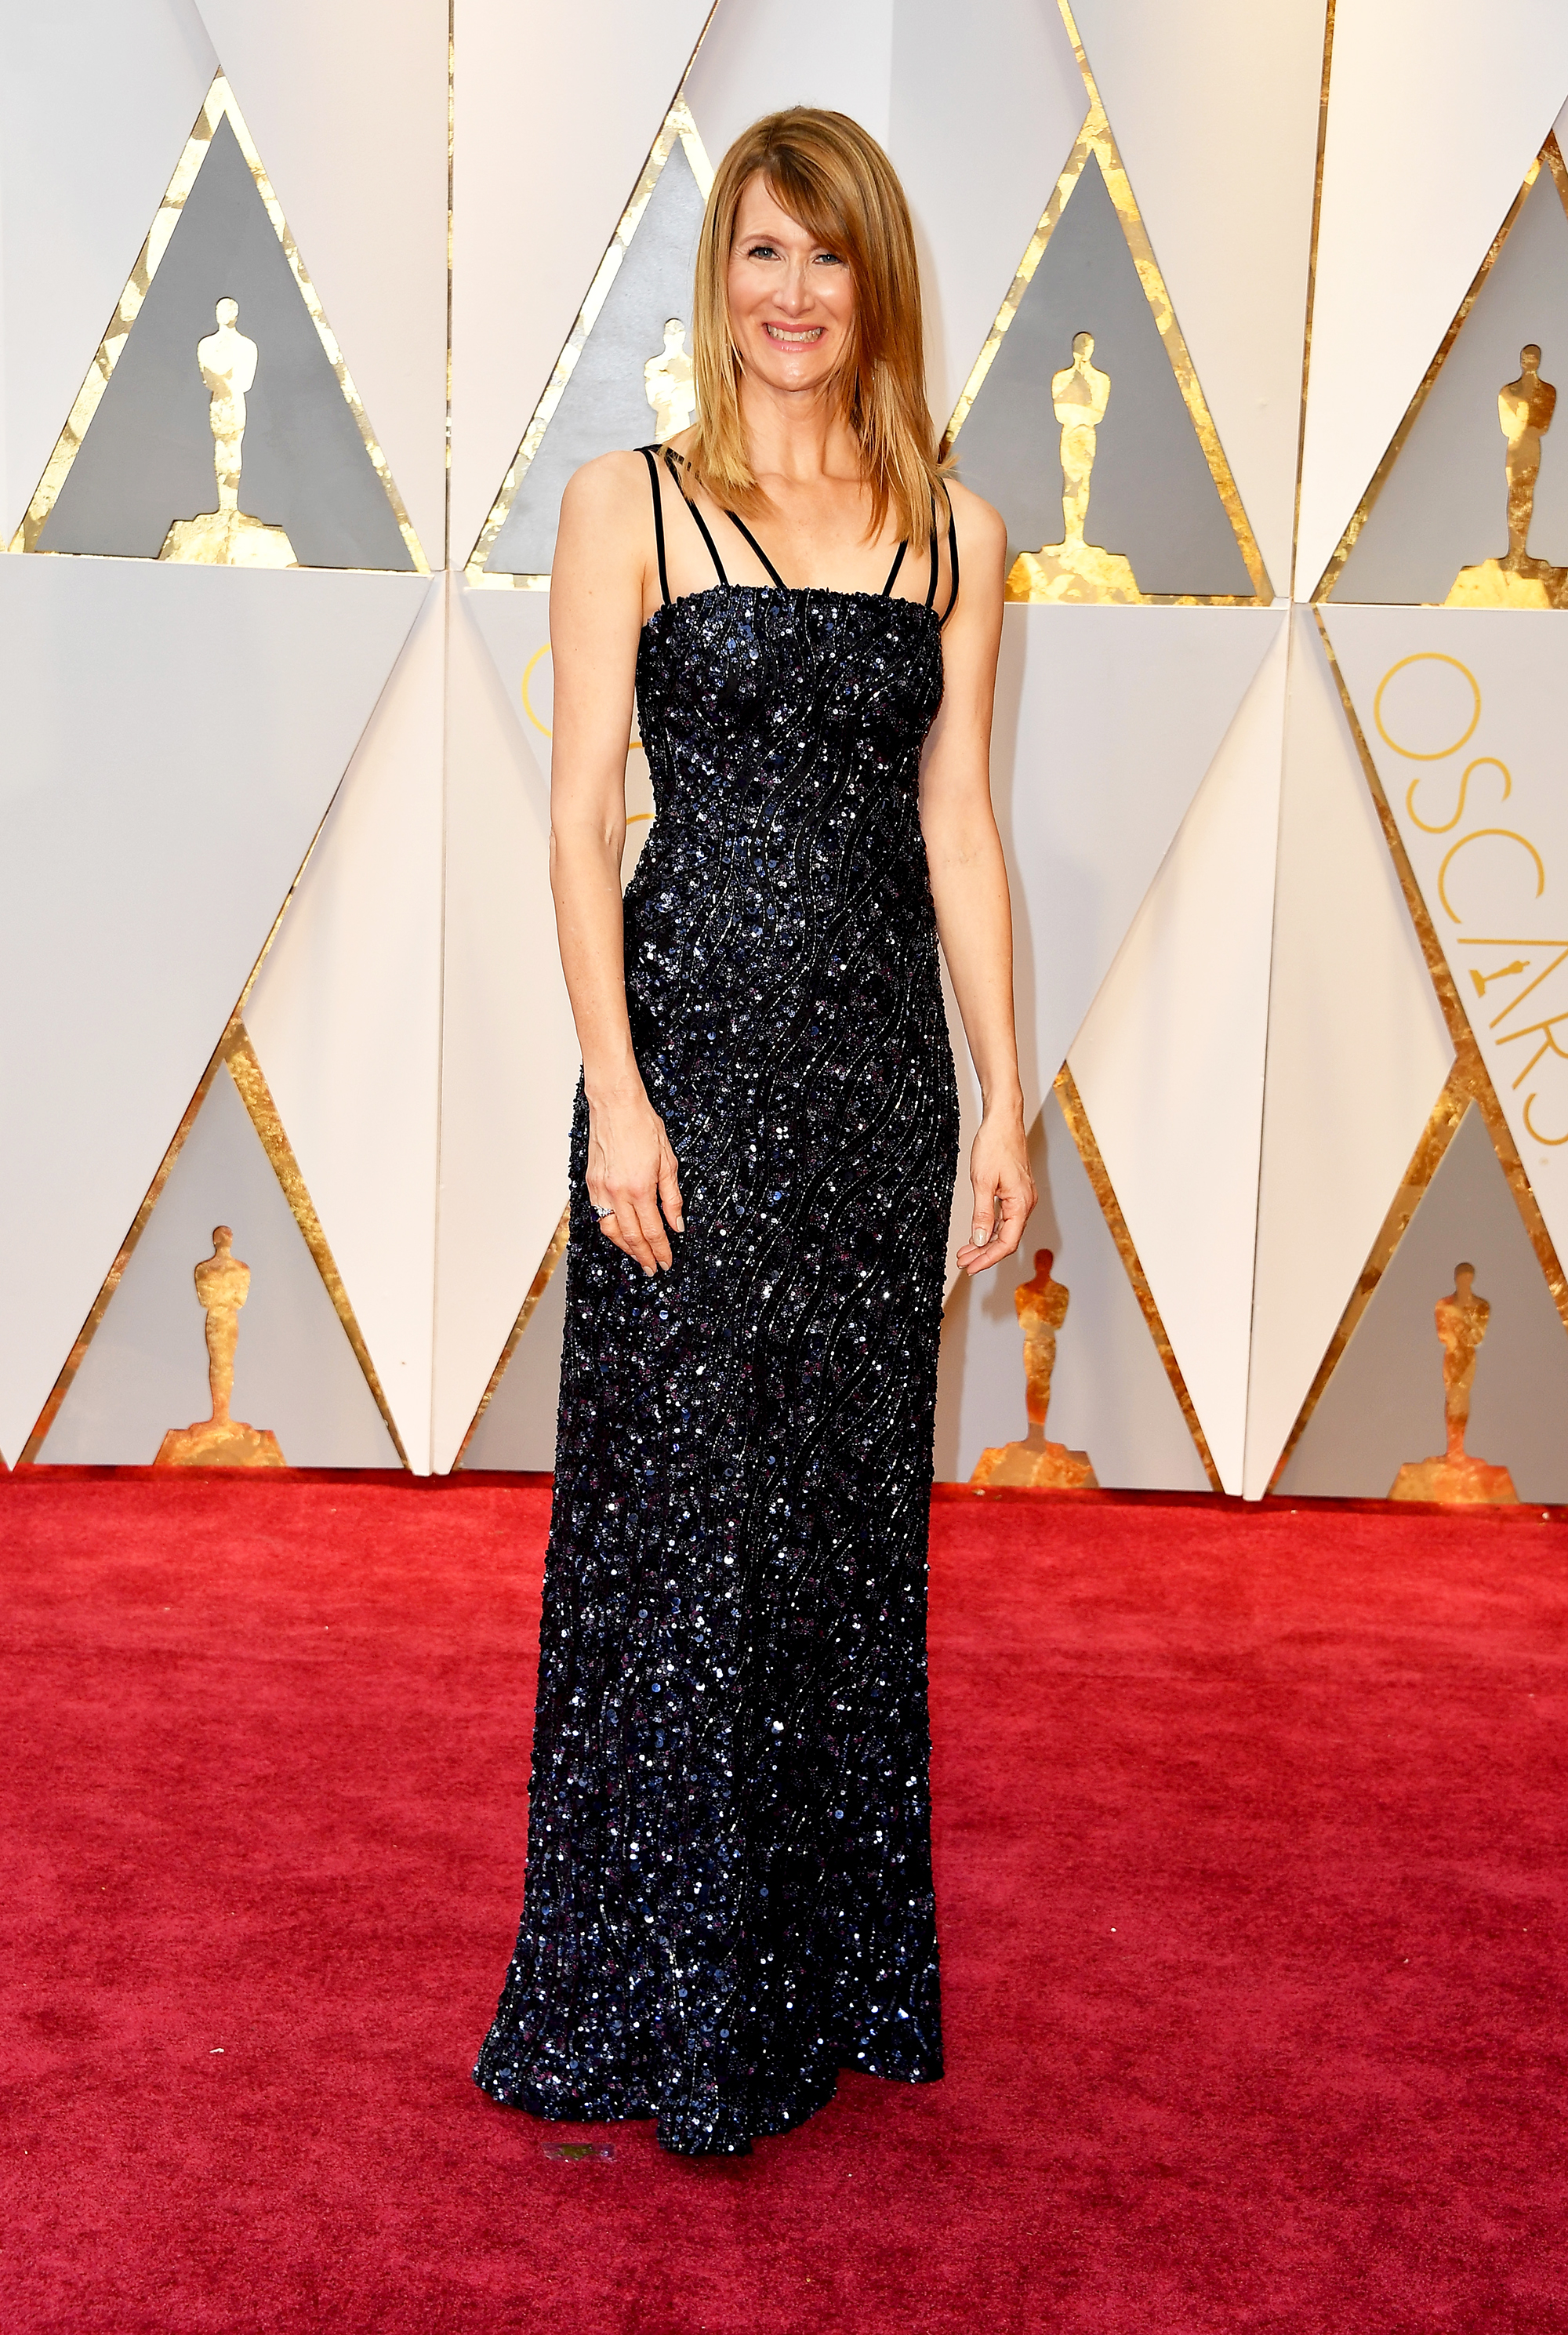 Laura Dern on the red carpet for the 89th Oscars, on Feb. 26, 2017 in Hollywood, Calif.